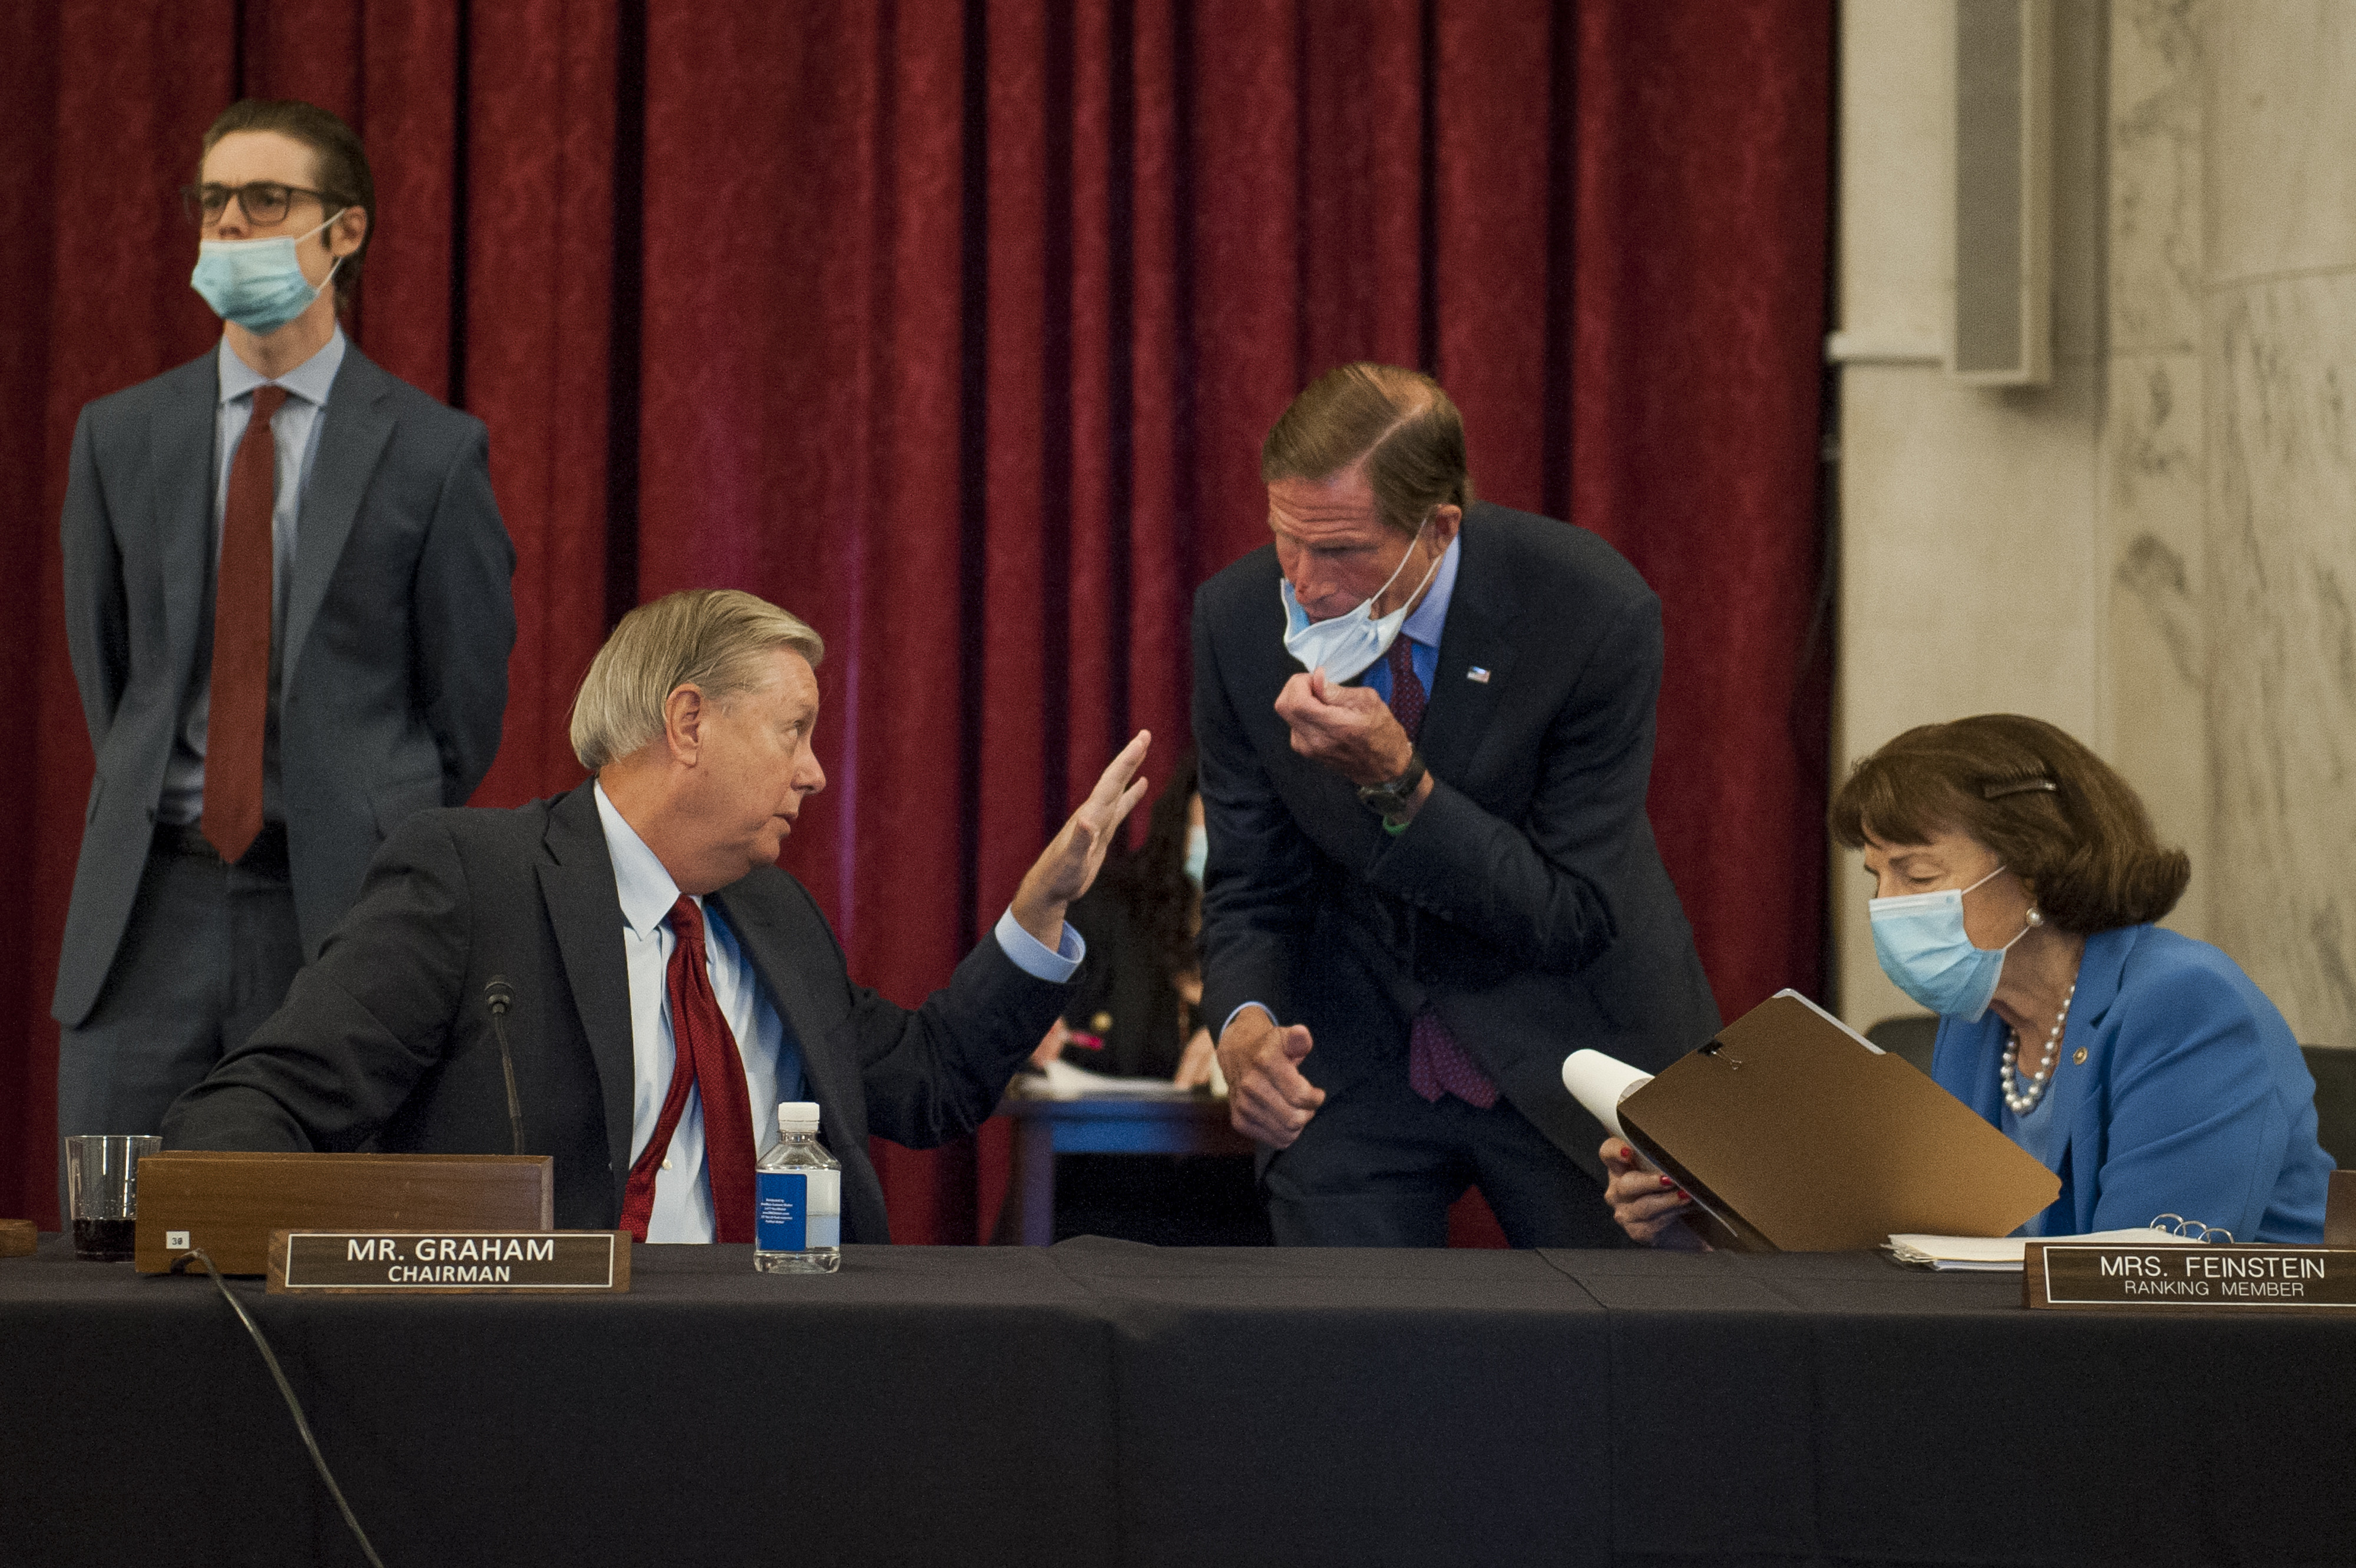 United States Senator Lindsey Graham (Republican of South Carolina), Chairman, US Senate Judiciary Committee, left, US Senator Richard Blumenthal (Democrat of Connecticut), center, and US Senator Dianne Feinstein (Democrat of California), Ranking Member, US Senate Judiciary Committee, right, chat prior to the committee markup of the "Eliminating Abusive and Rampant Neglect of Interactive Technologies (EARN IT) Act of 2020," and judicial nominations in Russell Senate Office Building on Capitol Hill in Washington, DC, USA, Thursday, July 2, 2020. Photo by Rod Lamkey/CNP/ABACAPRESS.COM